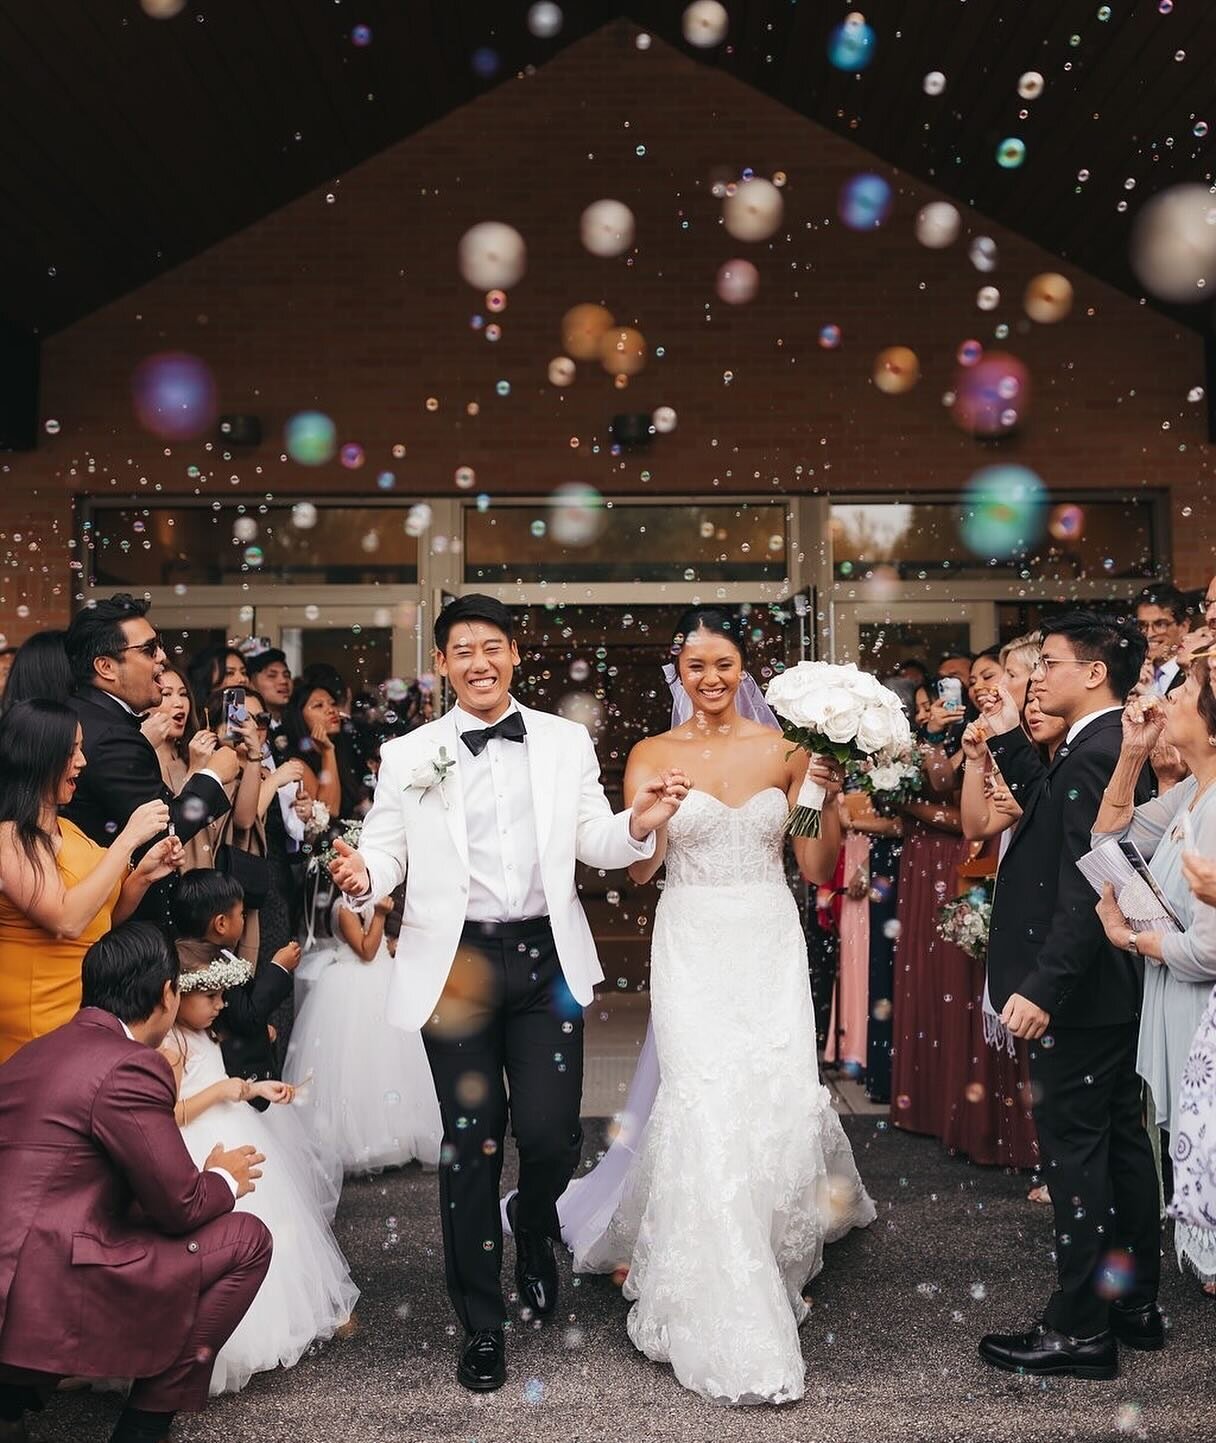 Stepping out into wedded bliss, one bubble at a time! 🎉💍 Here&rsquo;s to a lifetime of joy, laughter, and endless bubbles of love. 🤍

Planning: @urbanallureevents 
Venue: @michiganshoresclub
Photo: @sarahjanebradleyphotos
Video: @josephlotz_